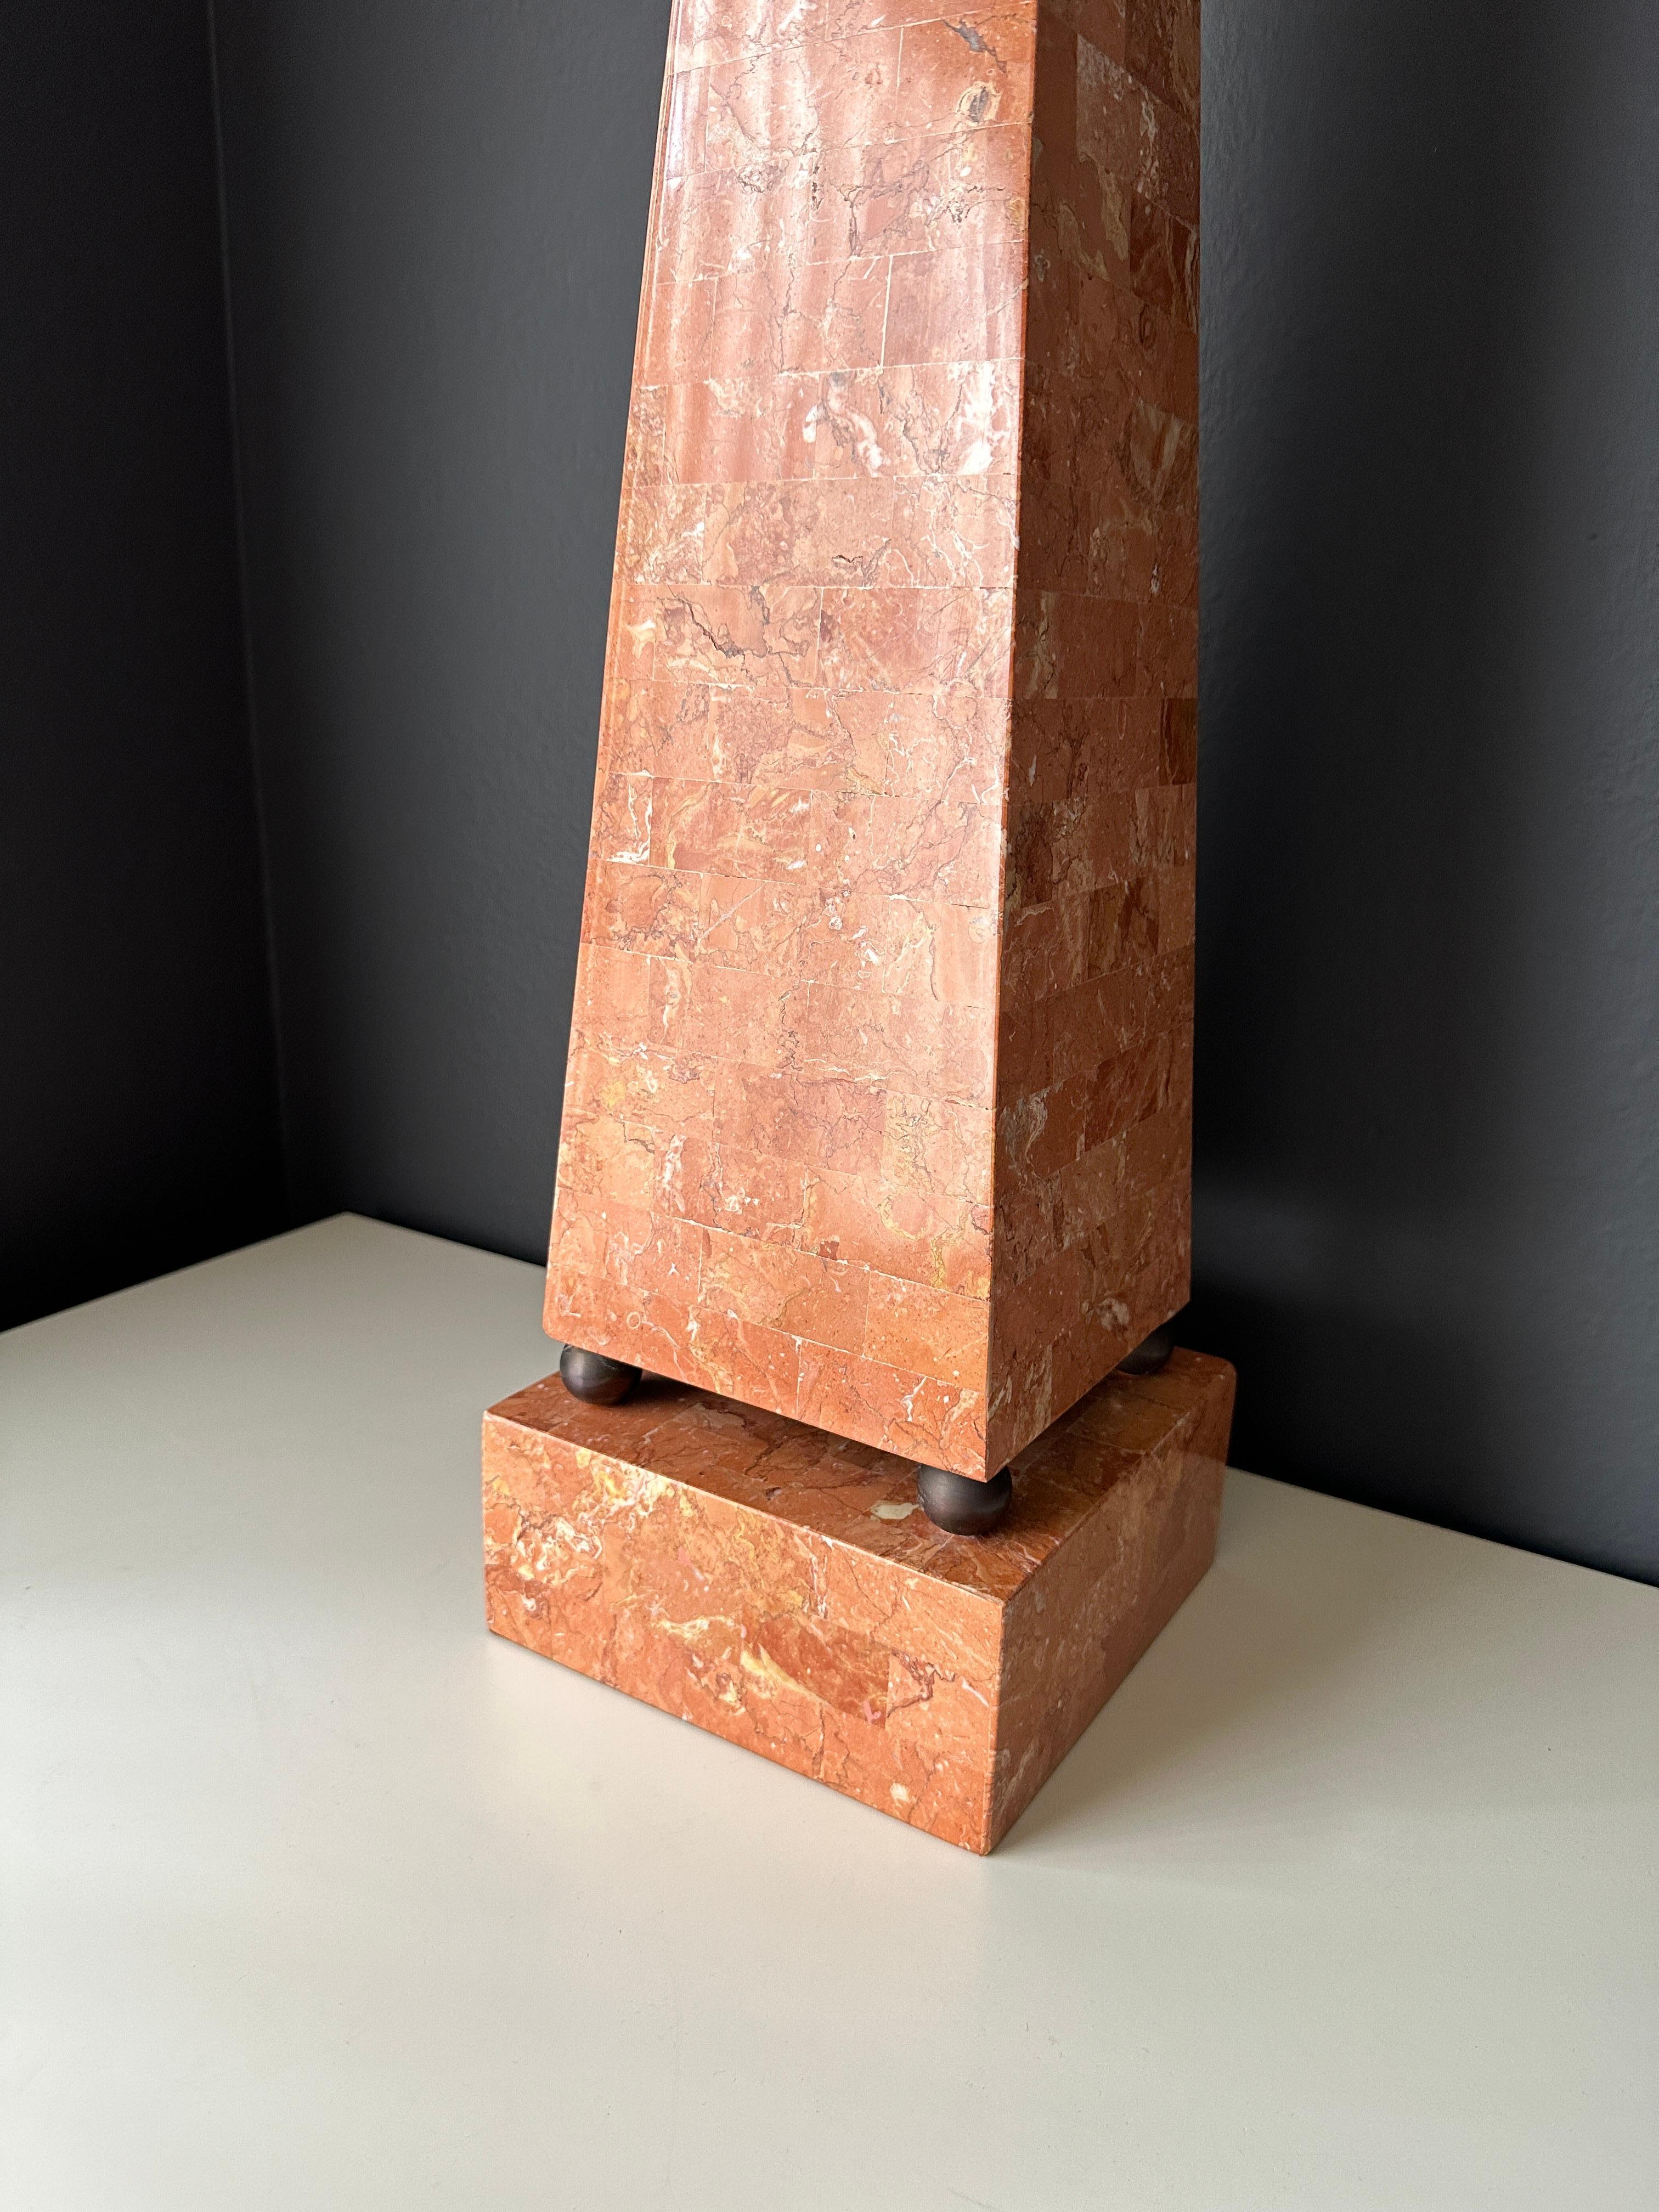 Pink salmon tessellated stone obelisk by Maitland Smith made in Philippines 1980s.